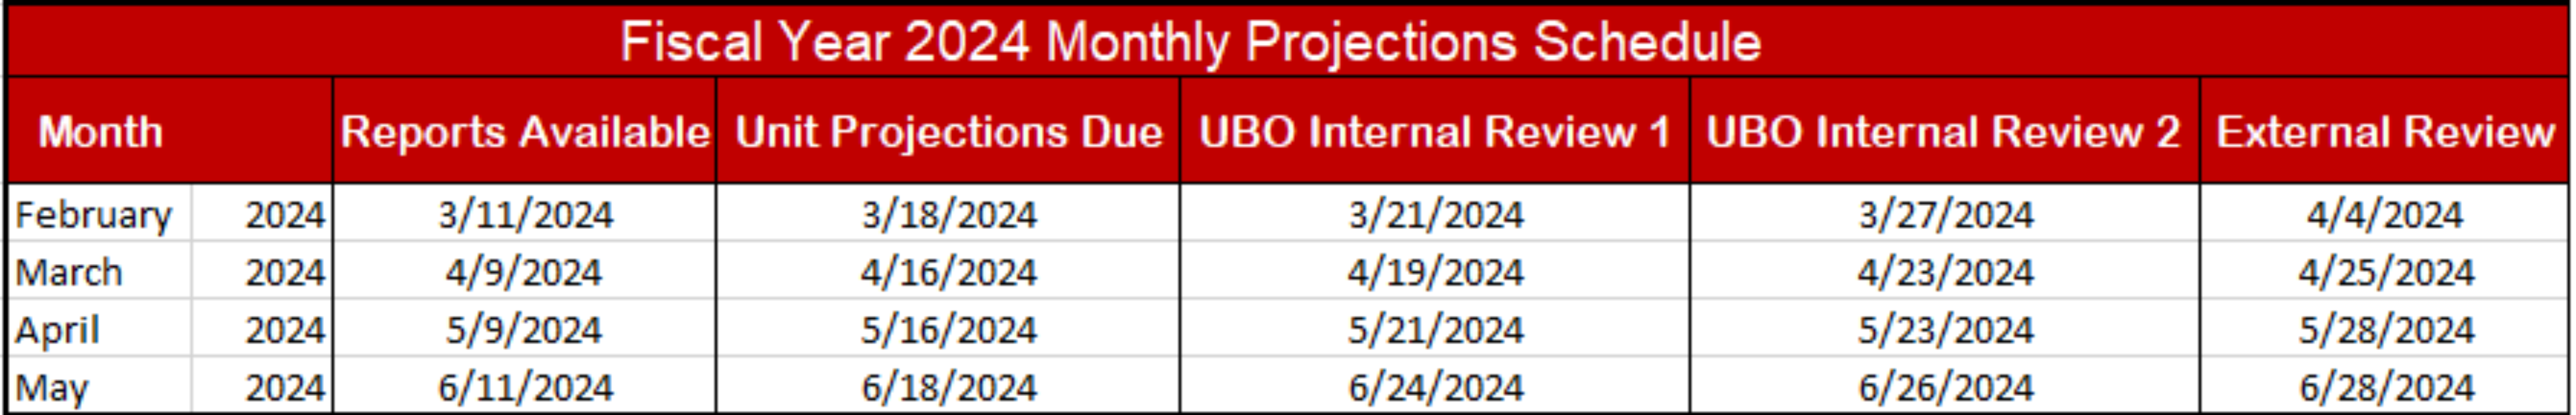 FY24 Monthly Projections Calendar